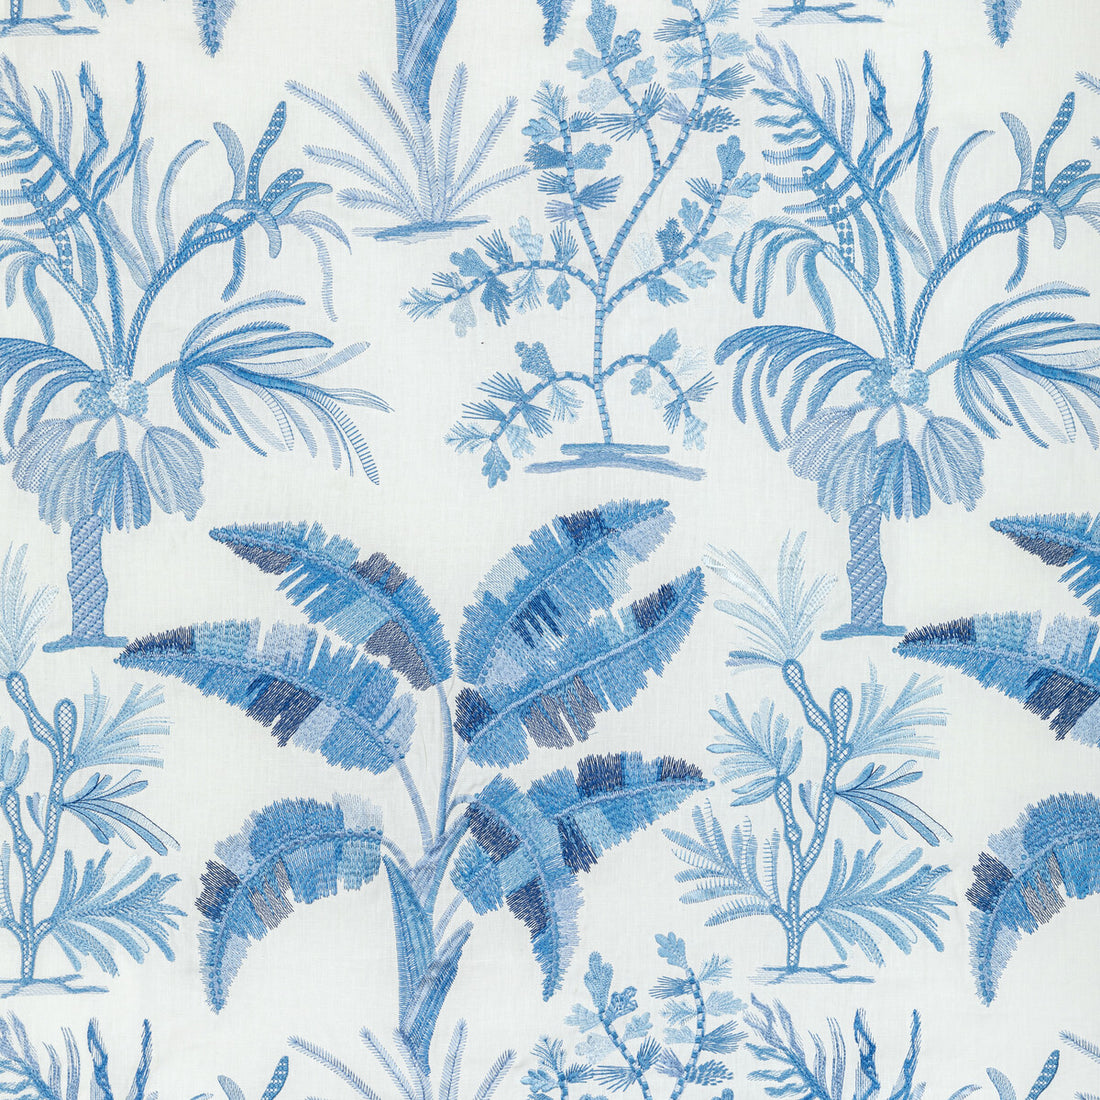 Martil Emb fabric in blue color - pattern 8022134.5.0 - by Brunschwig &amp; Fils in the Majorelle collection